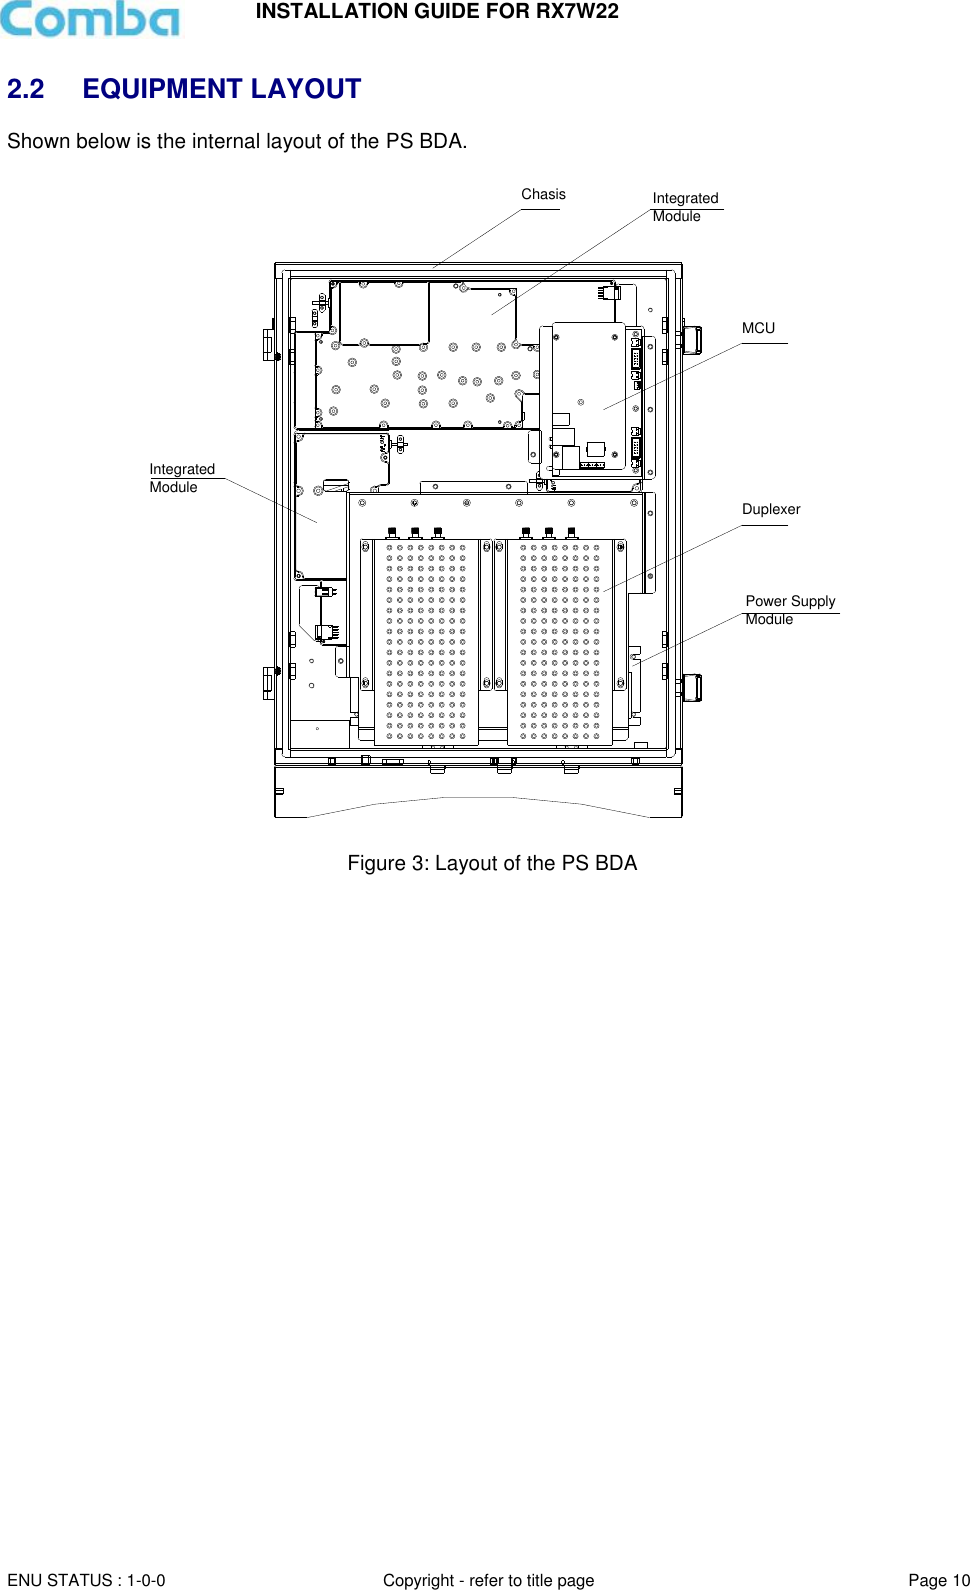 INSTALLATION GUIDE FOR RX7W22  ENU STATUS : 1-0-0 Copyright - refer to title page Page 10     2.2  EQUIPMENT LAYOUT Shown below is the internal layout of the PS BDA.   Figure 3: Layout of the PS BDA     MCUDuplexerPower SupplyModuleIntegratedModuleChasis IntegratedModule